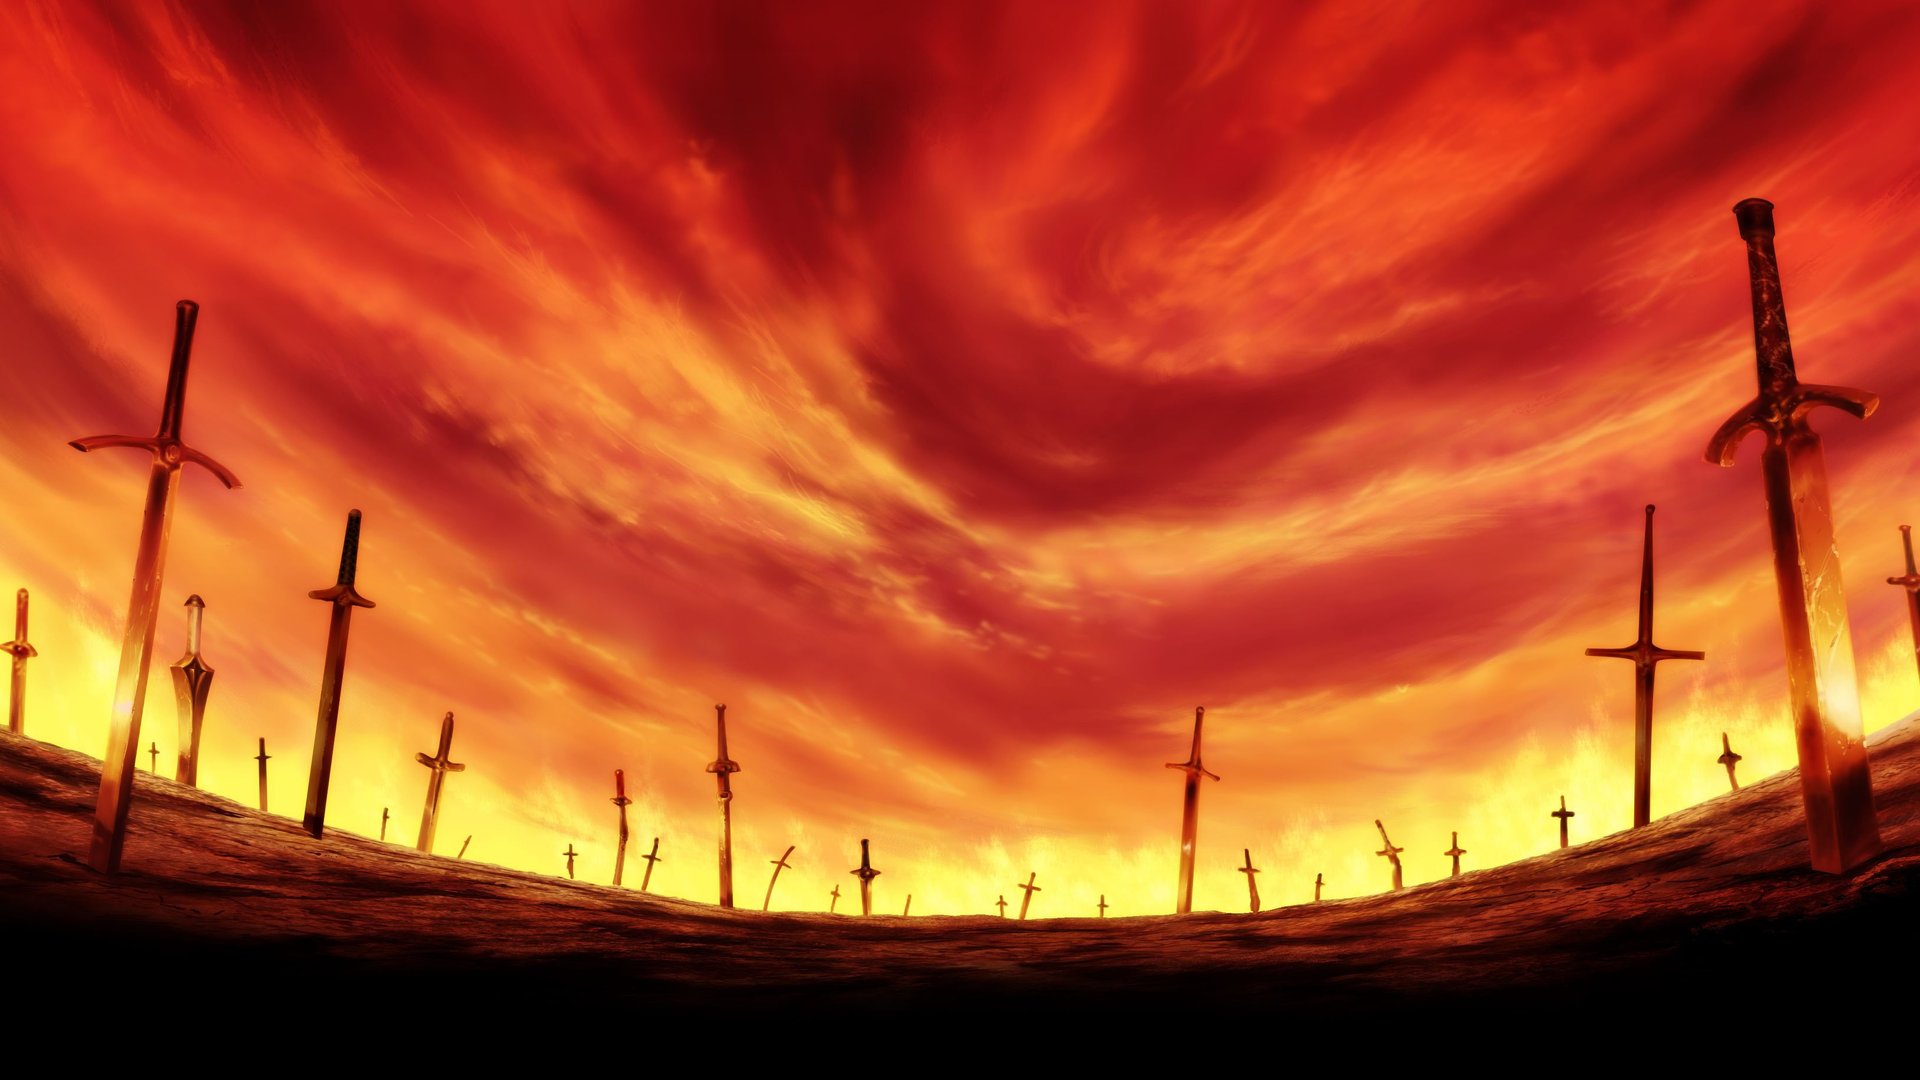 Download Sky Sword Anime Fatestay Night Unlimited Blade Works Hd Wallpaper